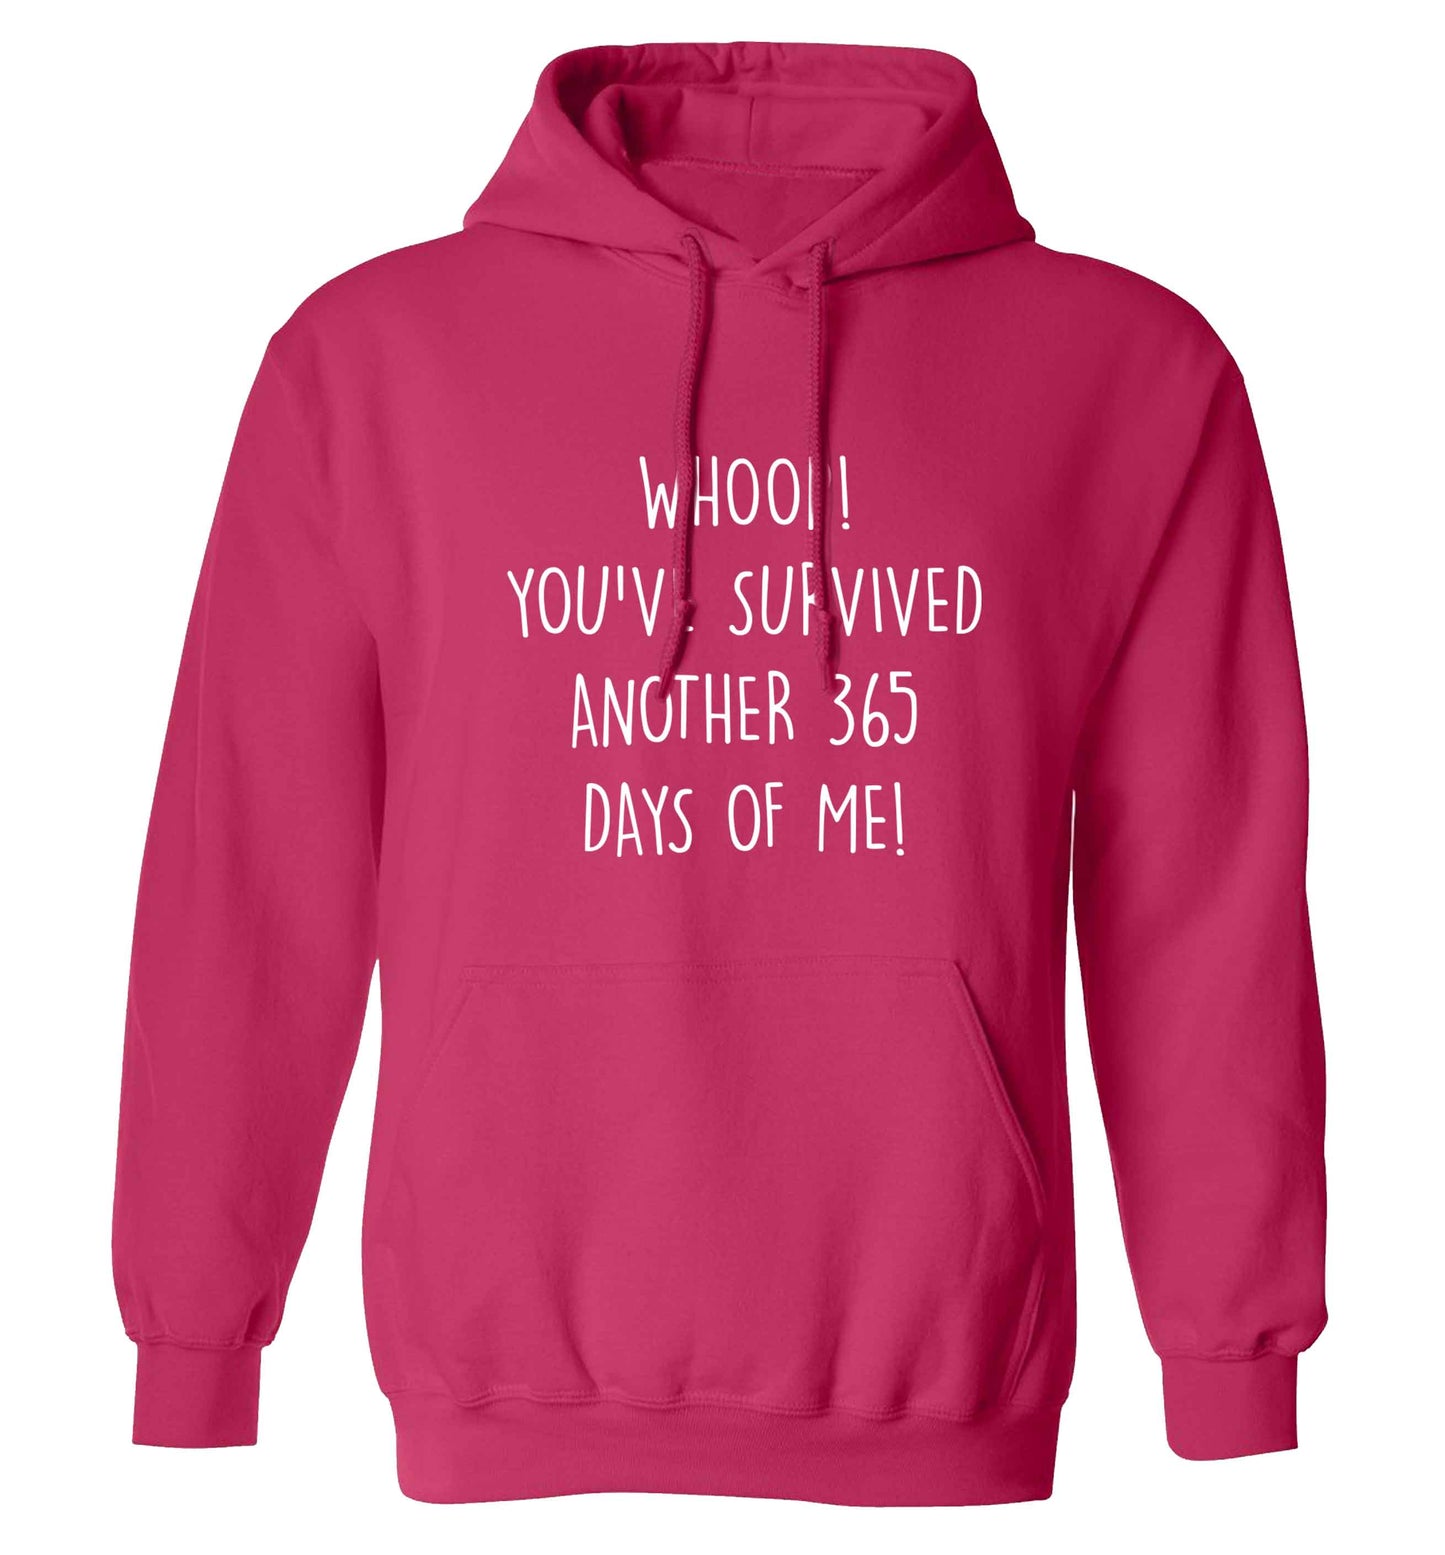 Whoop! You've survived another 365 days with me! adults unisex pink hoodie 2XL